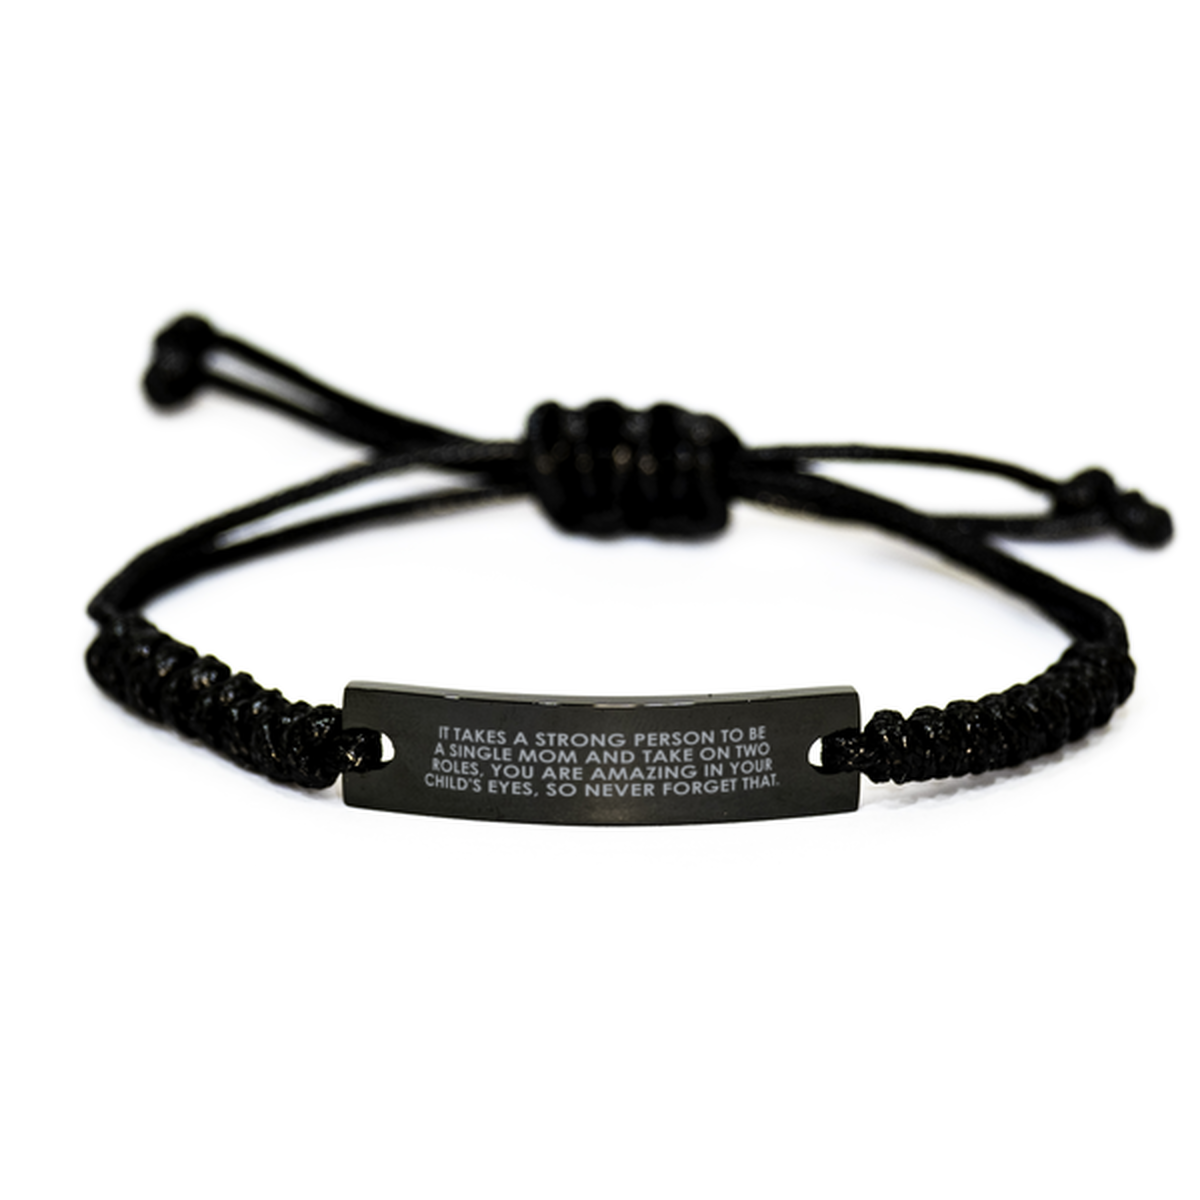 To My Single Mom Rope Bracelet, A Strong Person, Valentines Gifts For Single Mom From Friends, Birthday Gifts For Women